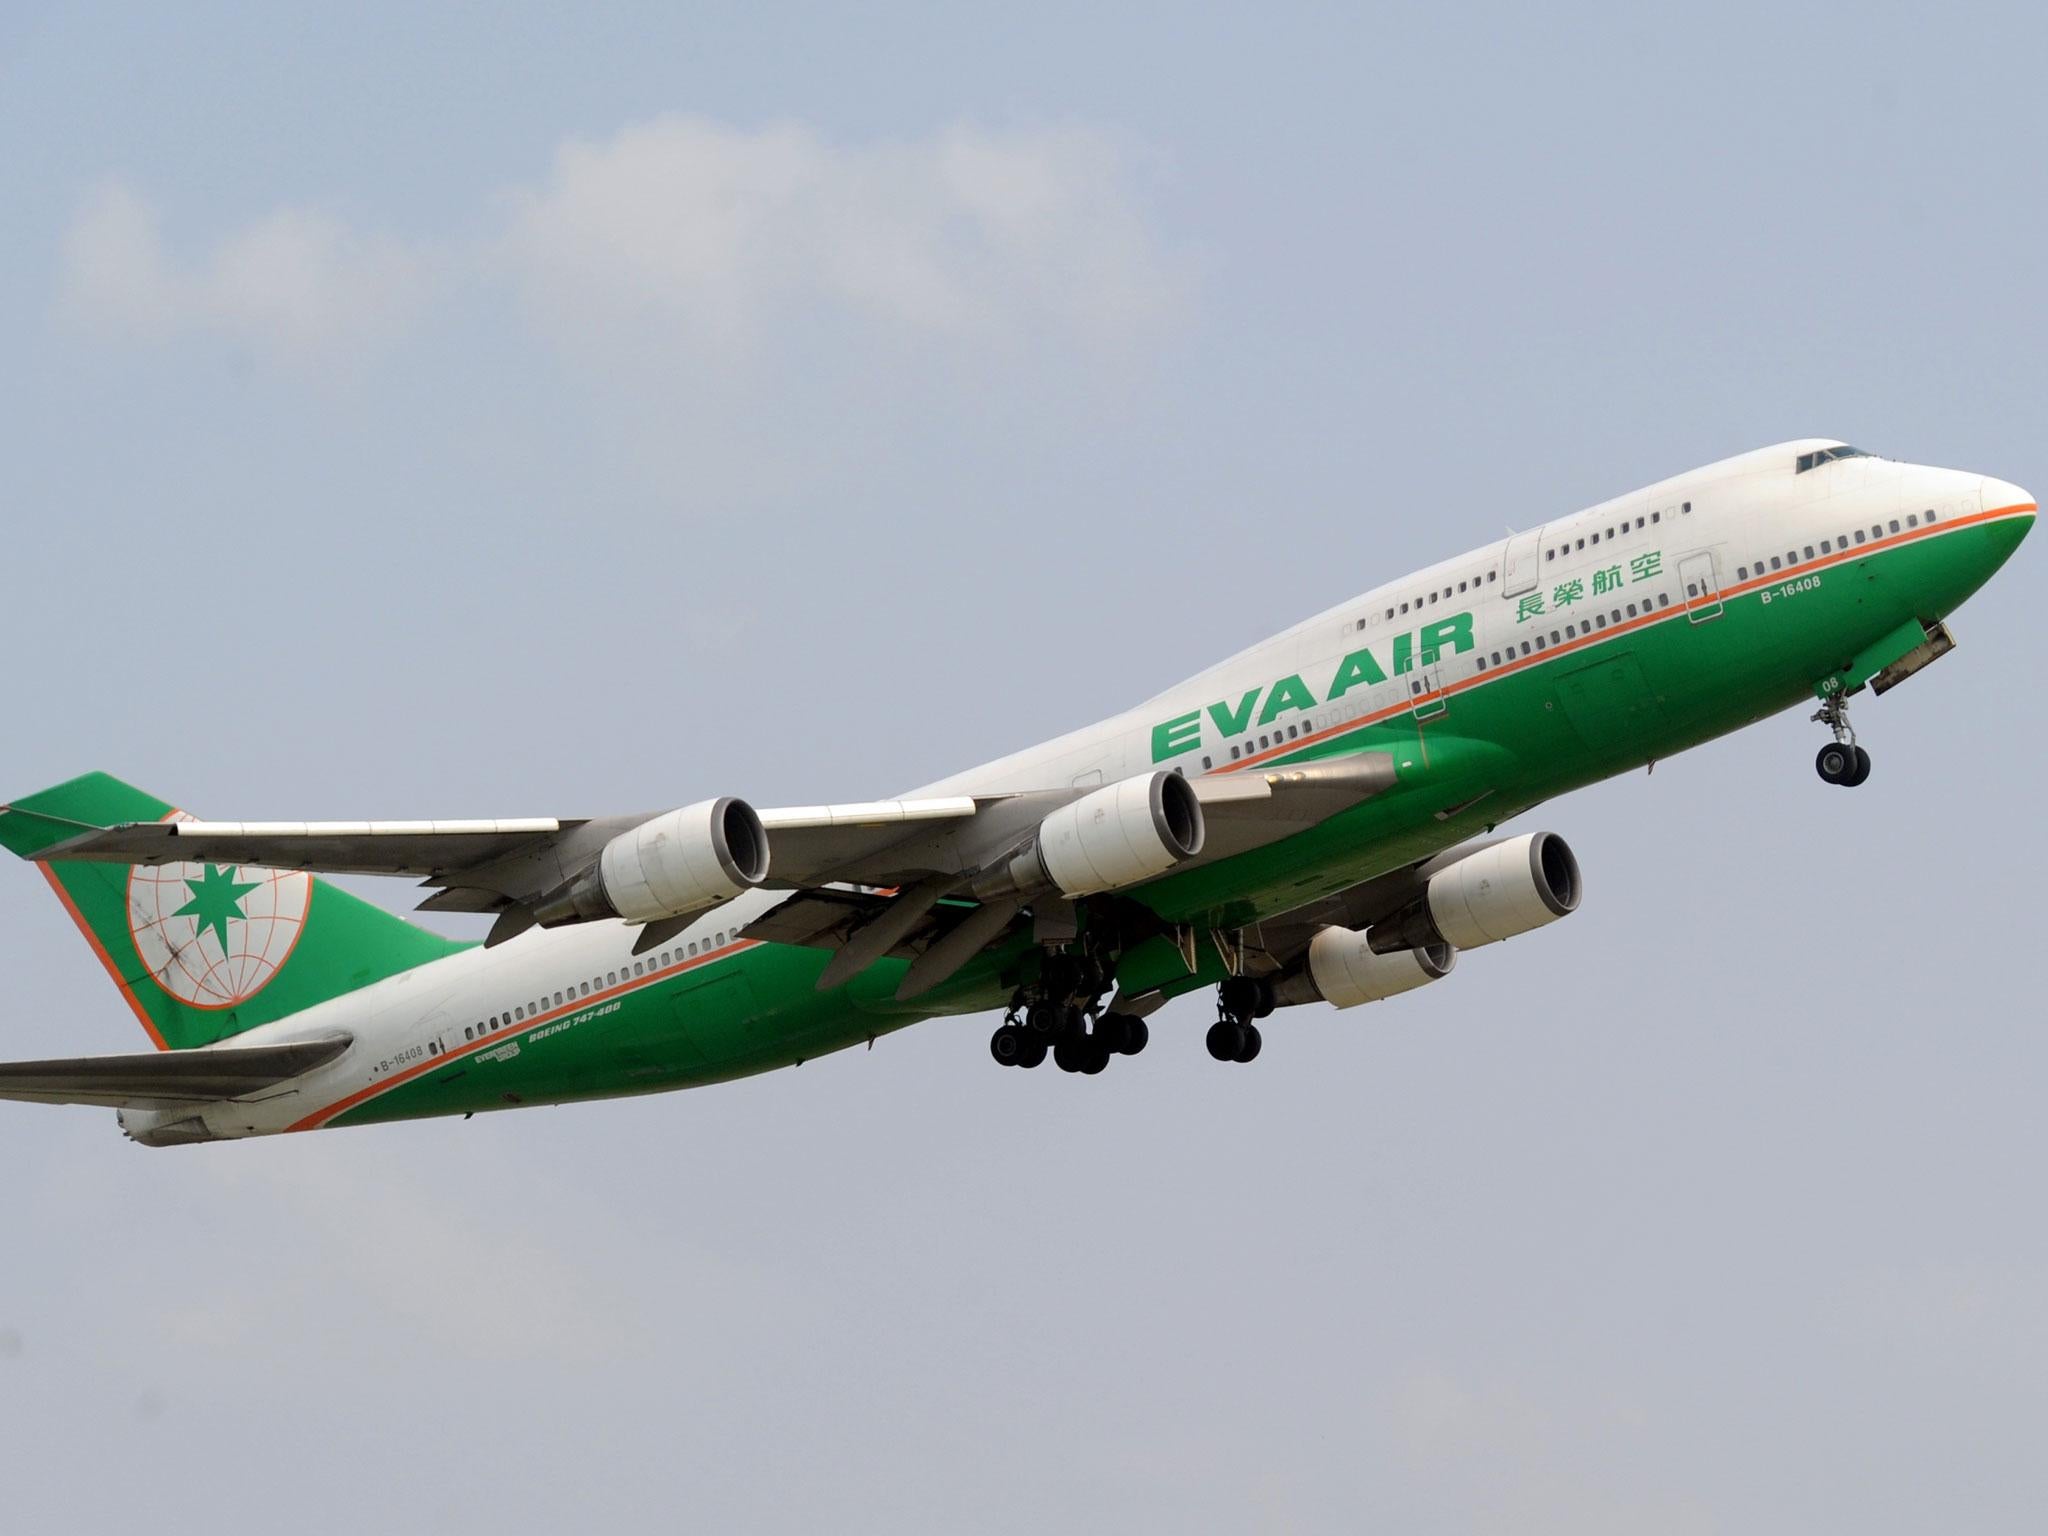 EVA Air is finding ways to fly despite travel restrictions